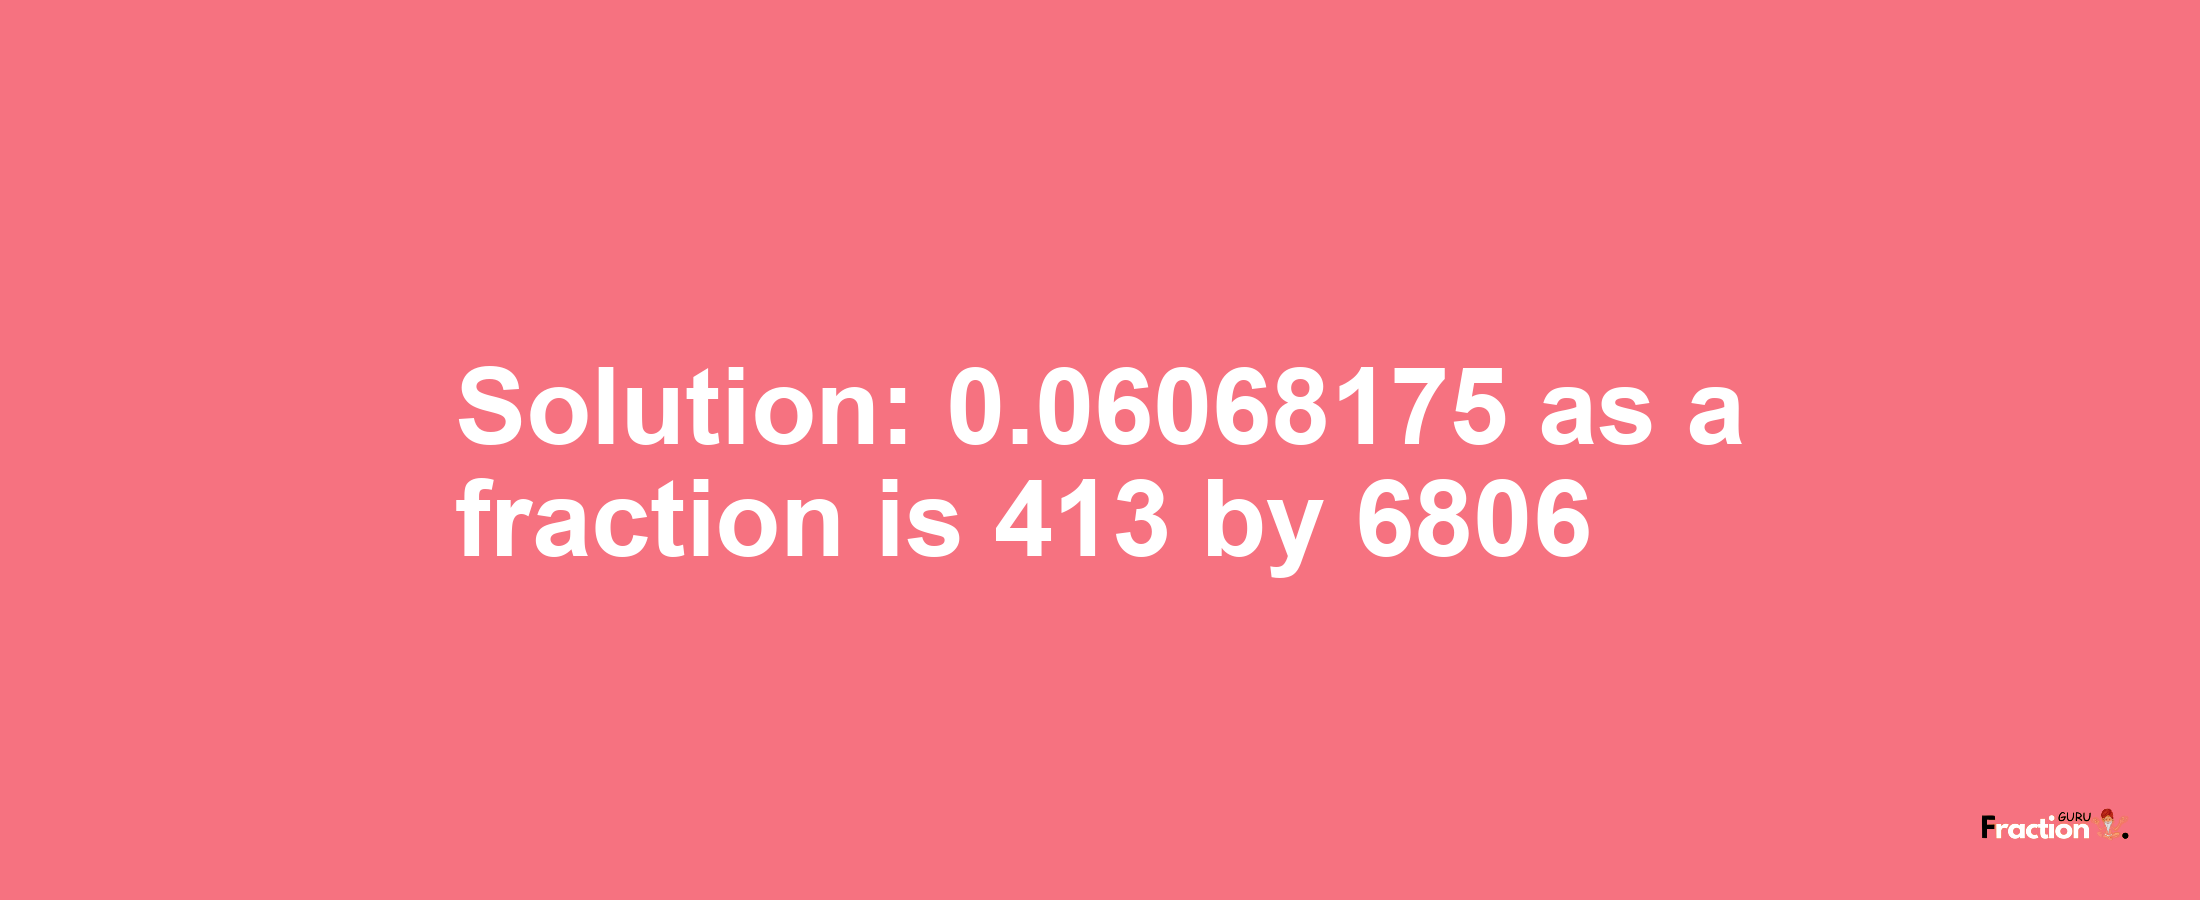 Solution:0.06068175 as a fraction is 413/6806